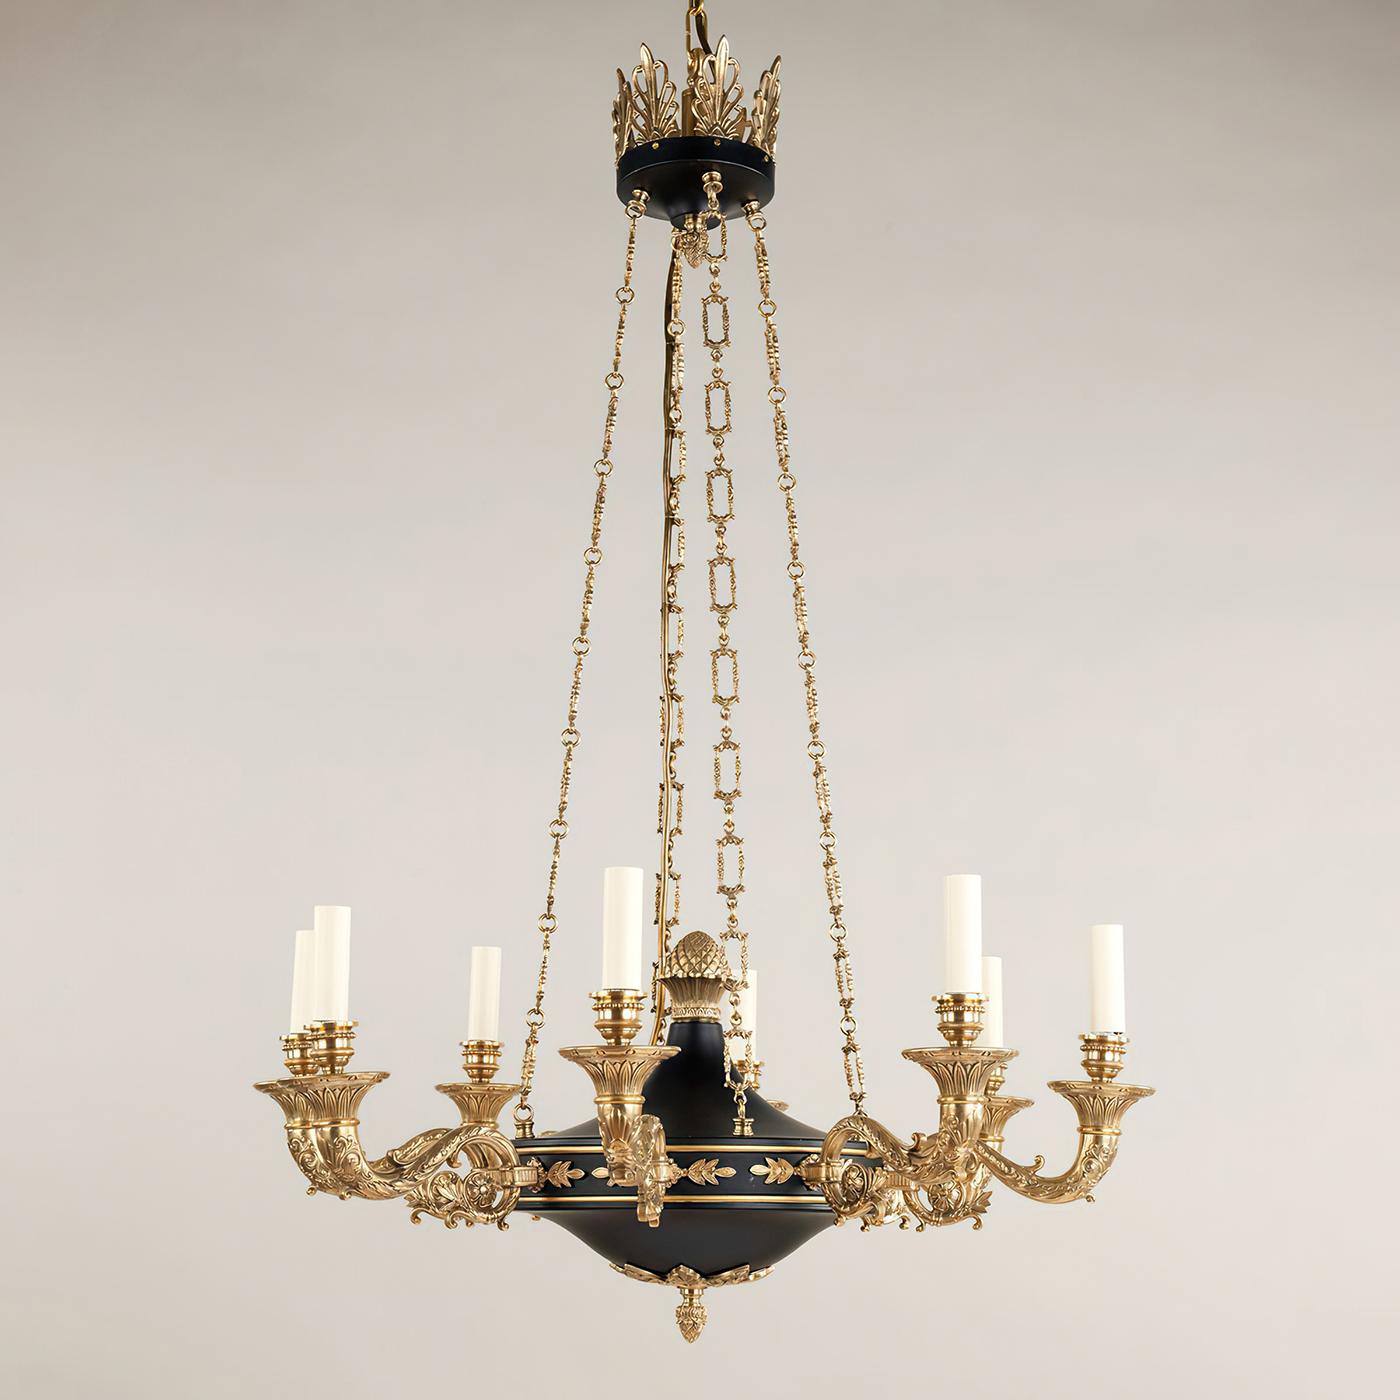 French Empire style eight-light chandelier, with intricate brass casting that, contrasts with the black to create a striking effect. The fine detail of the chains complements the finial and decorative arms. With an ornate crown, scrolling arms, and